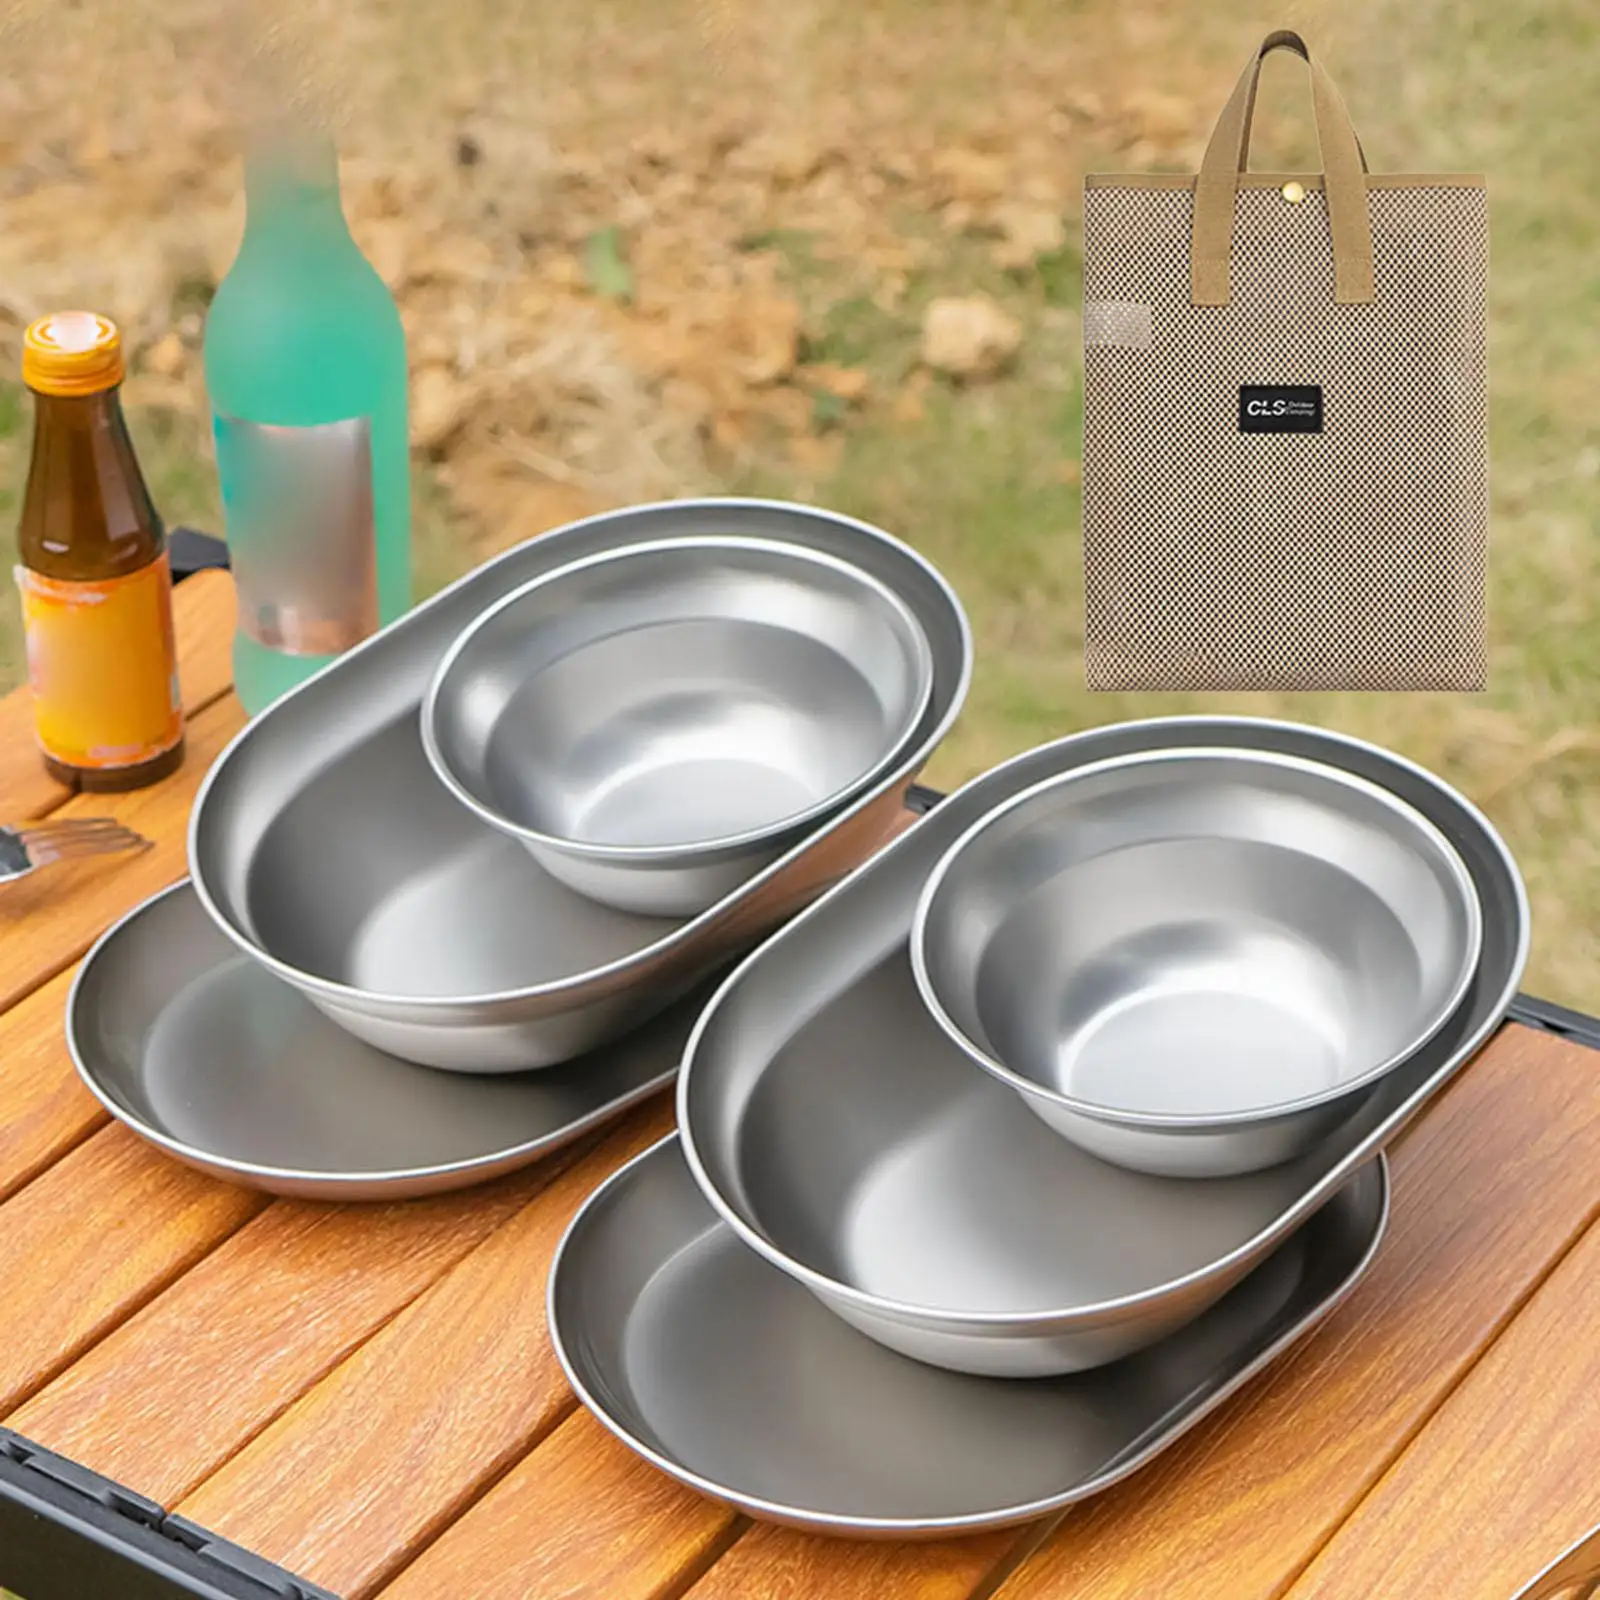 Stainless Steel Plates and Bowls Small Bowl Plate Durable Camping Utensils for Camp Self Driving Tour Outdoor Equipment Fishing